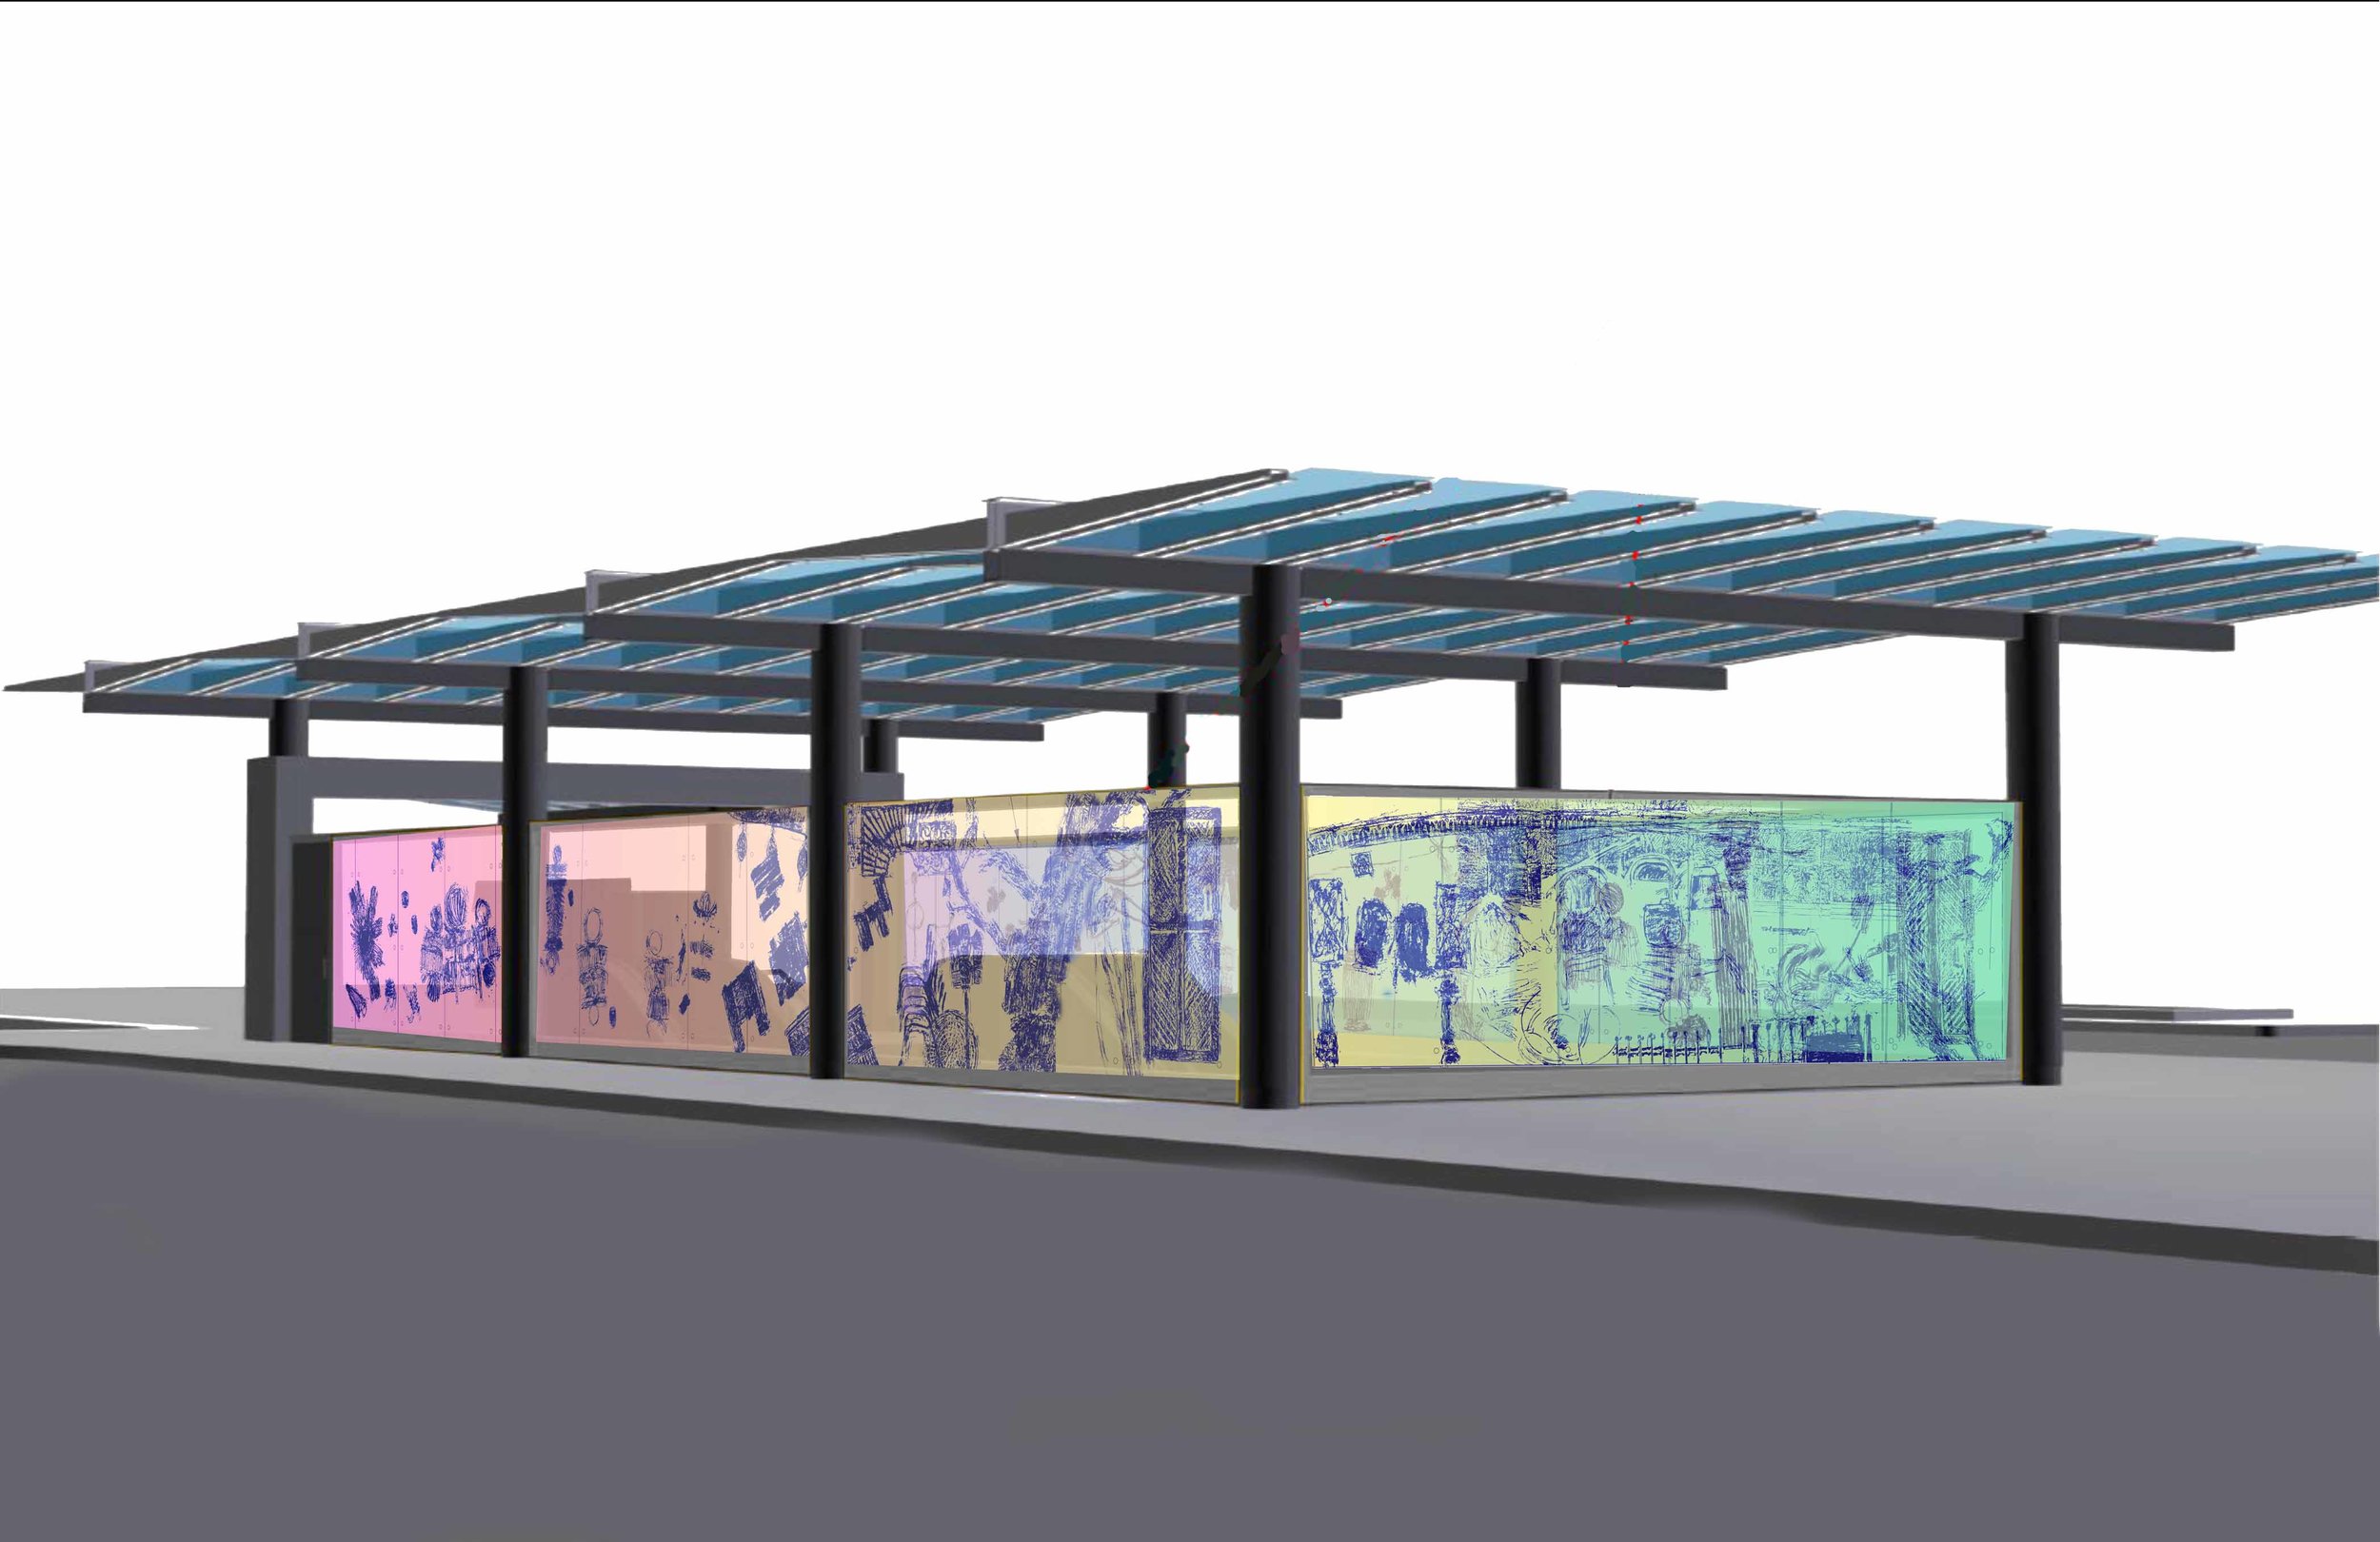 "Talking Drums", design for Metro Art: Leimert Park Subway station, L.A., view from left